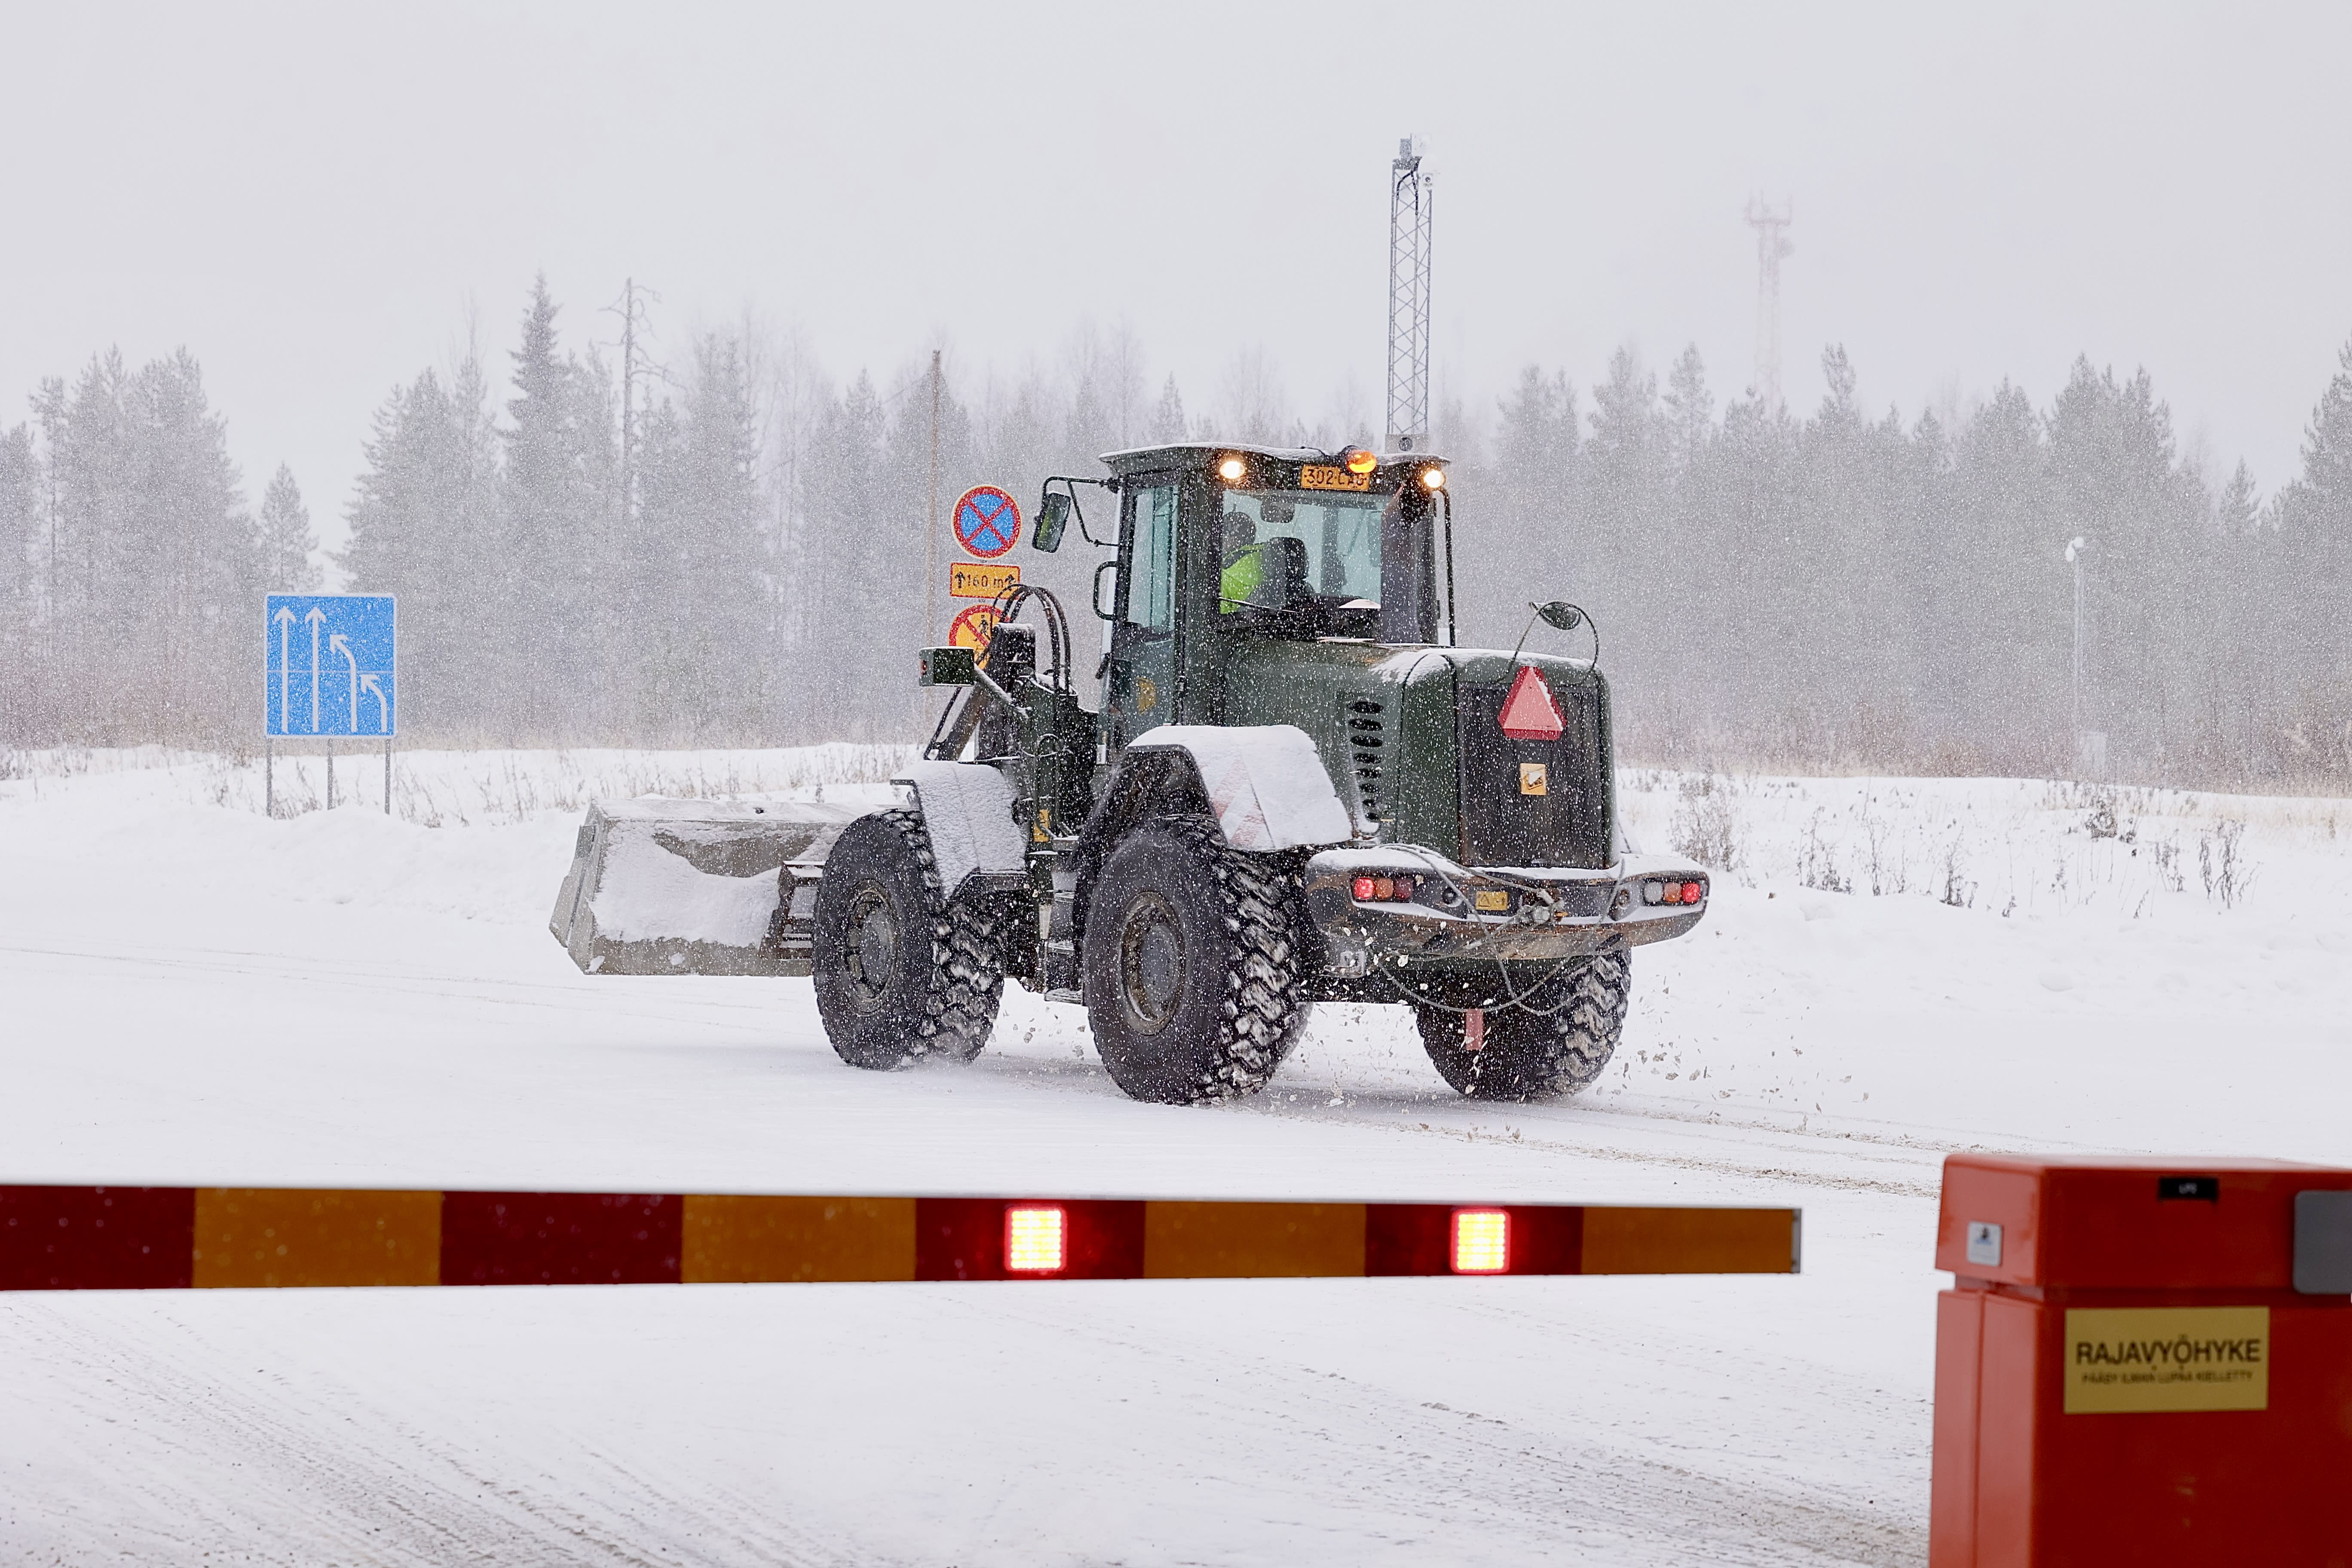 Defense forces assisting in the construction of a temporary border fence in Kuhmo